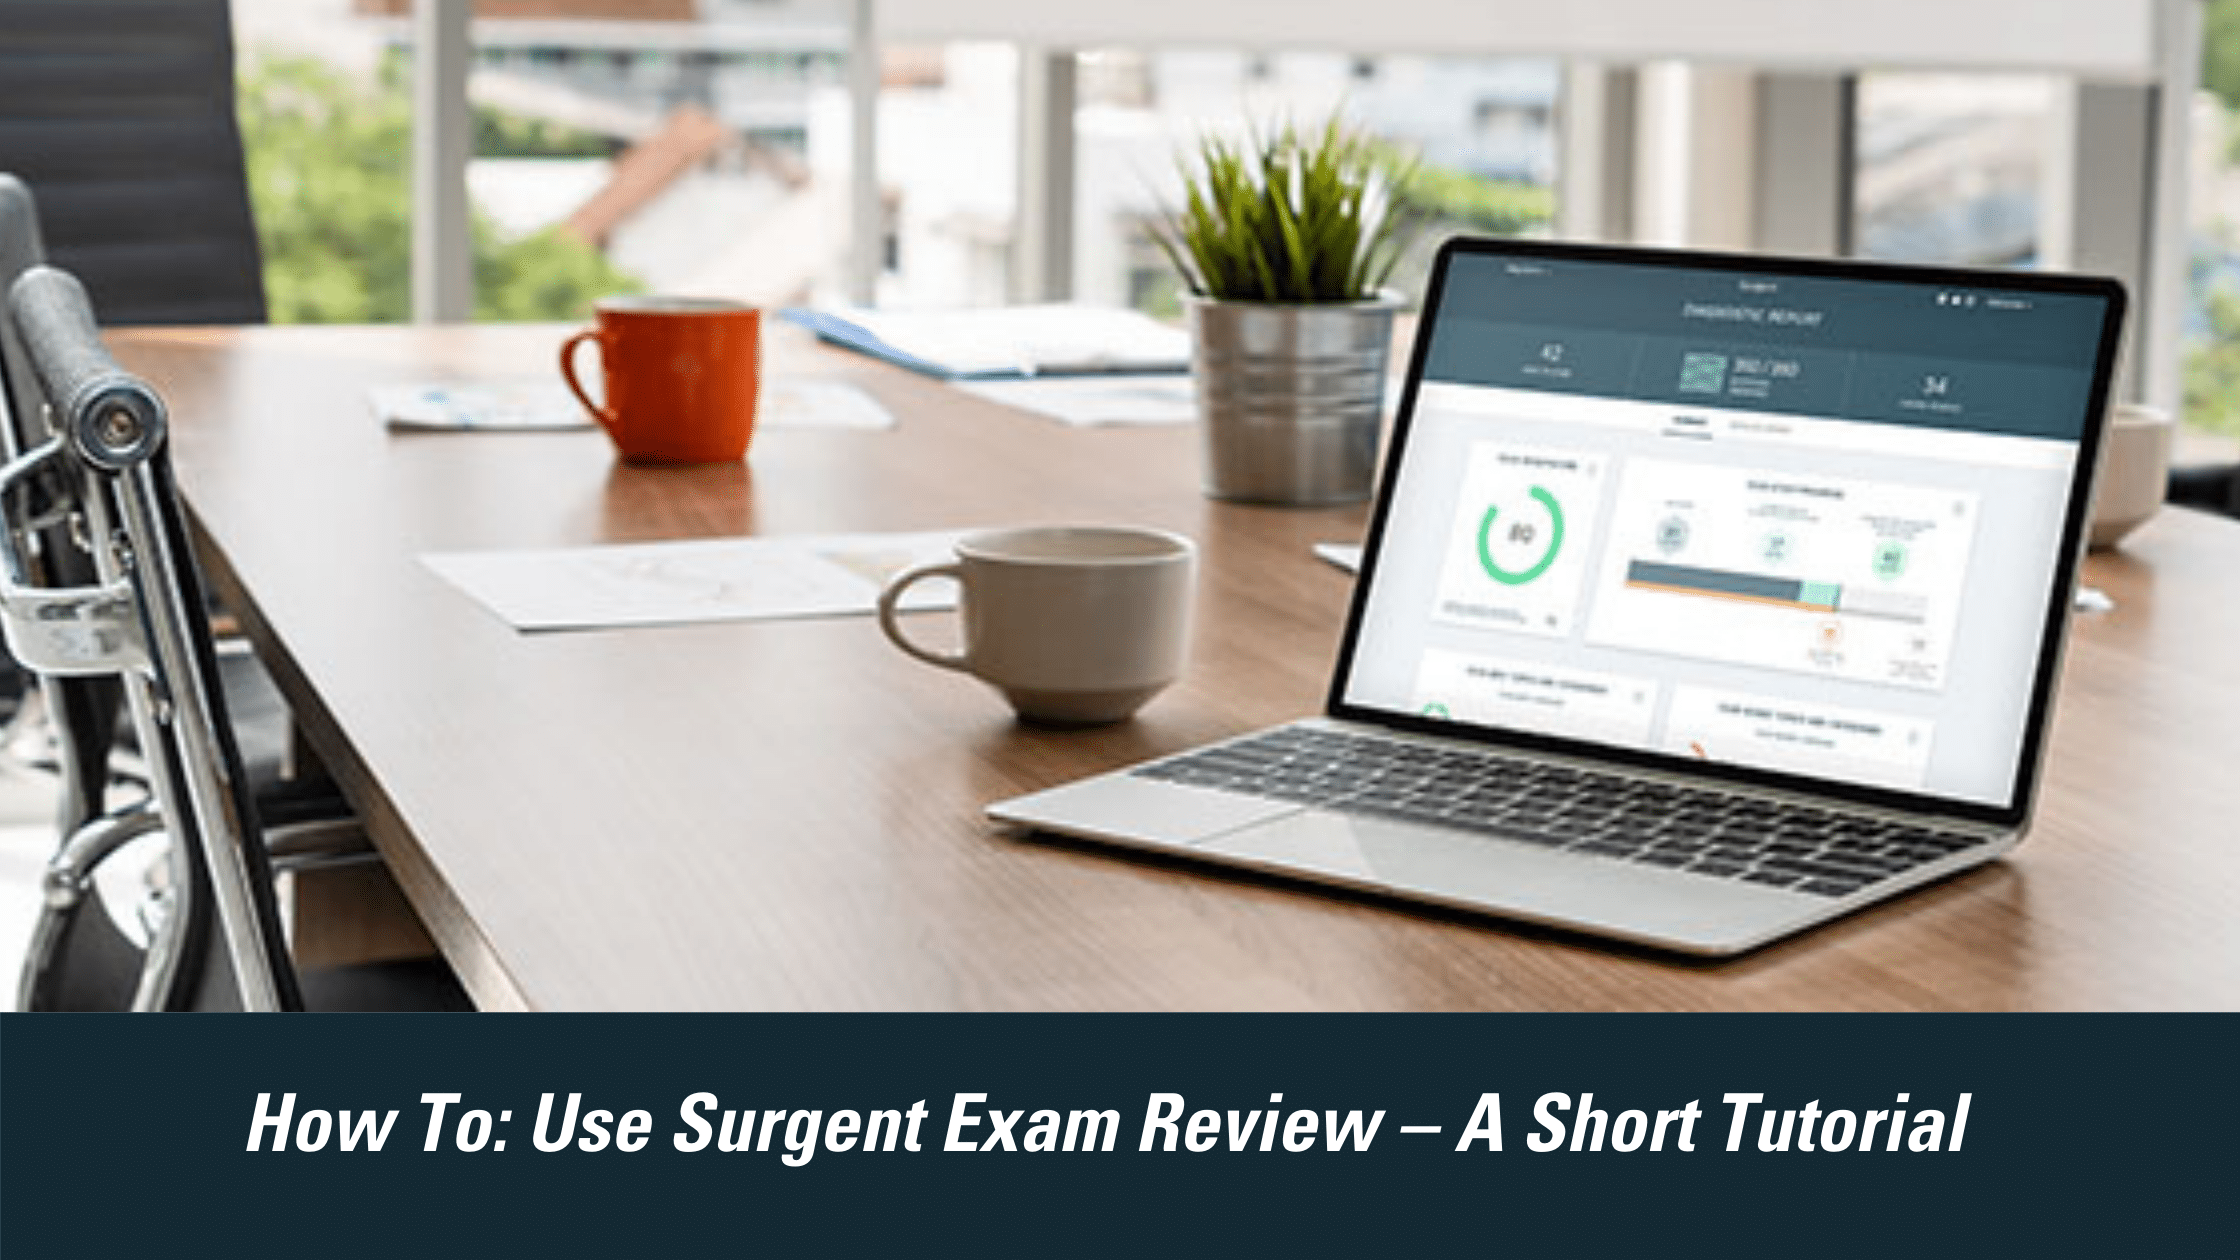 How To Use Surgent Exam Review – A Short Tutorial